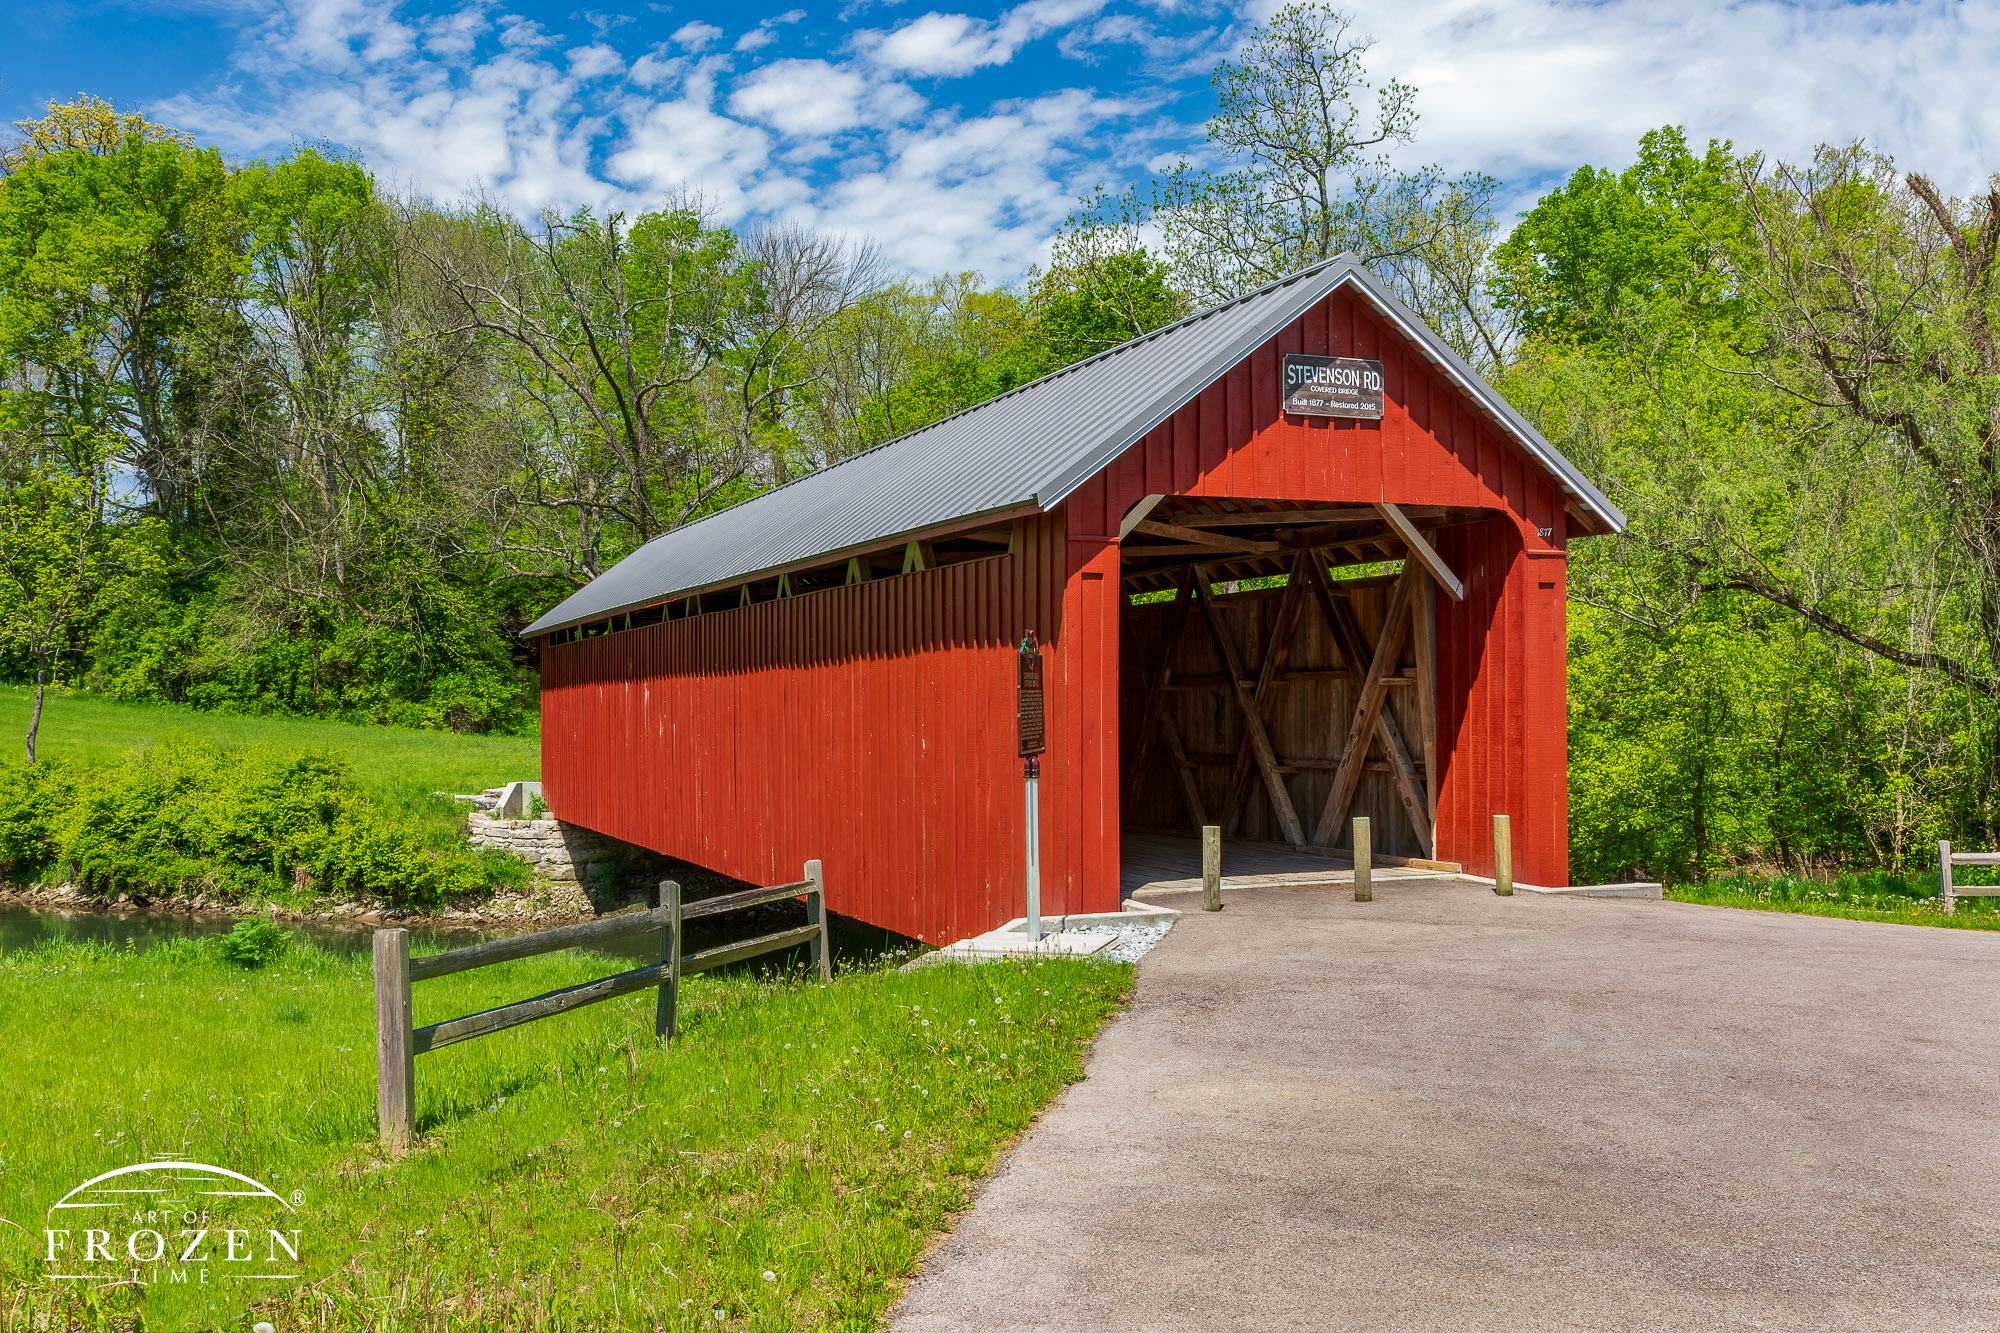 A covered bridge where its red paint contrasts with the green spring leaves and crystal blue skies